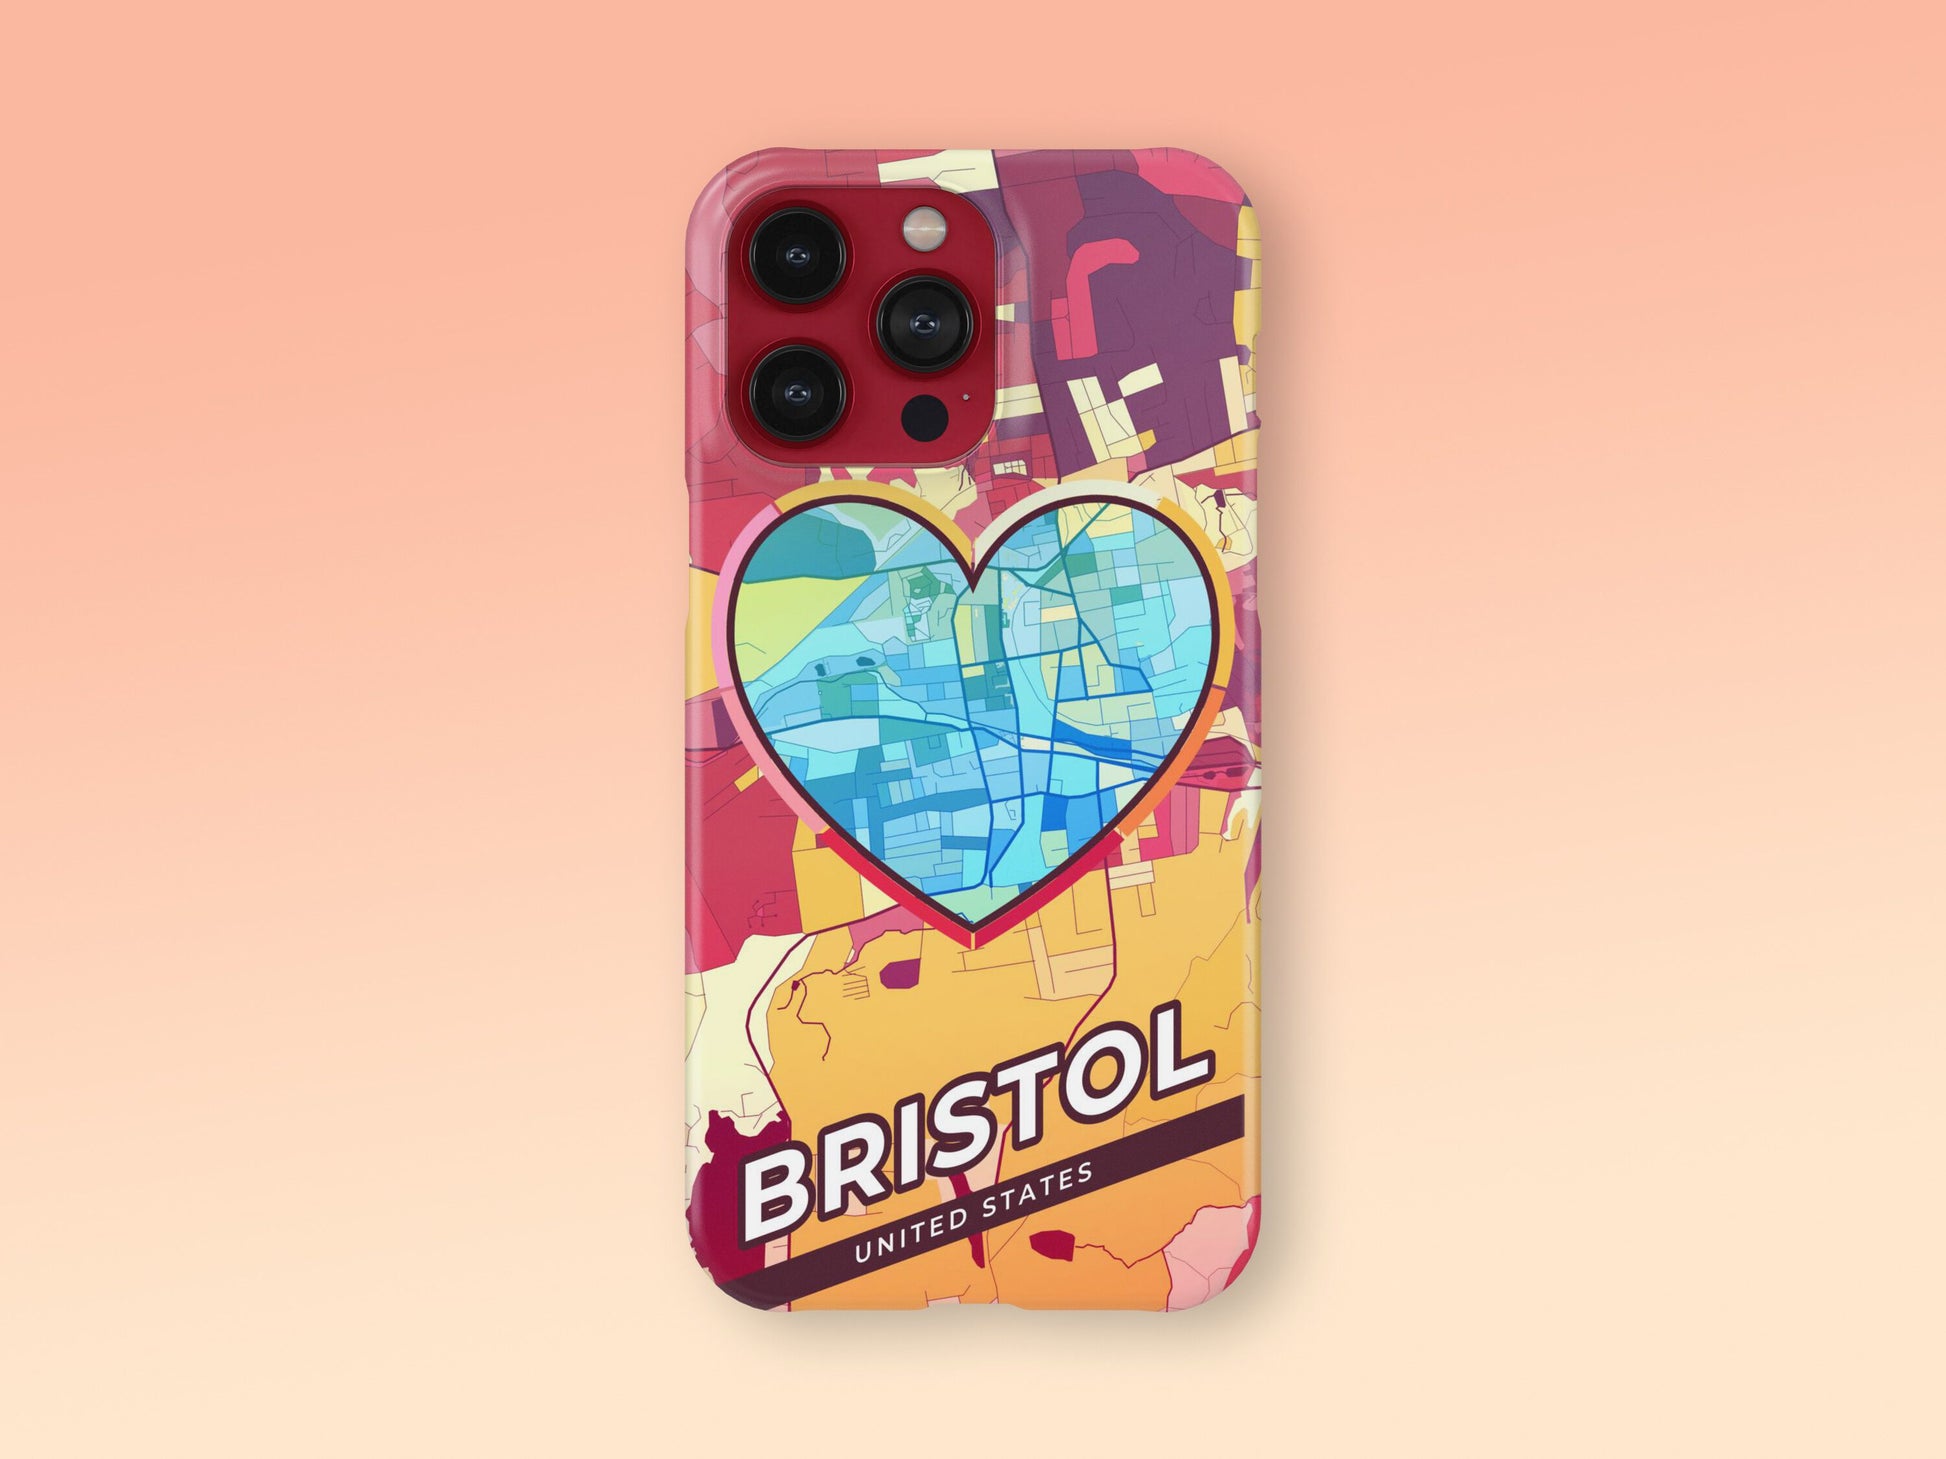 Bristol Connecticut slim phone case with colorful icon. Birthday, wedding or housewarming gift. Couple match cases. 2